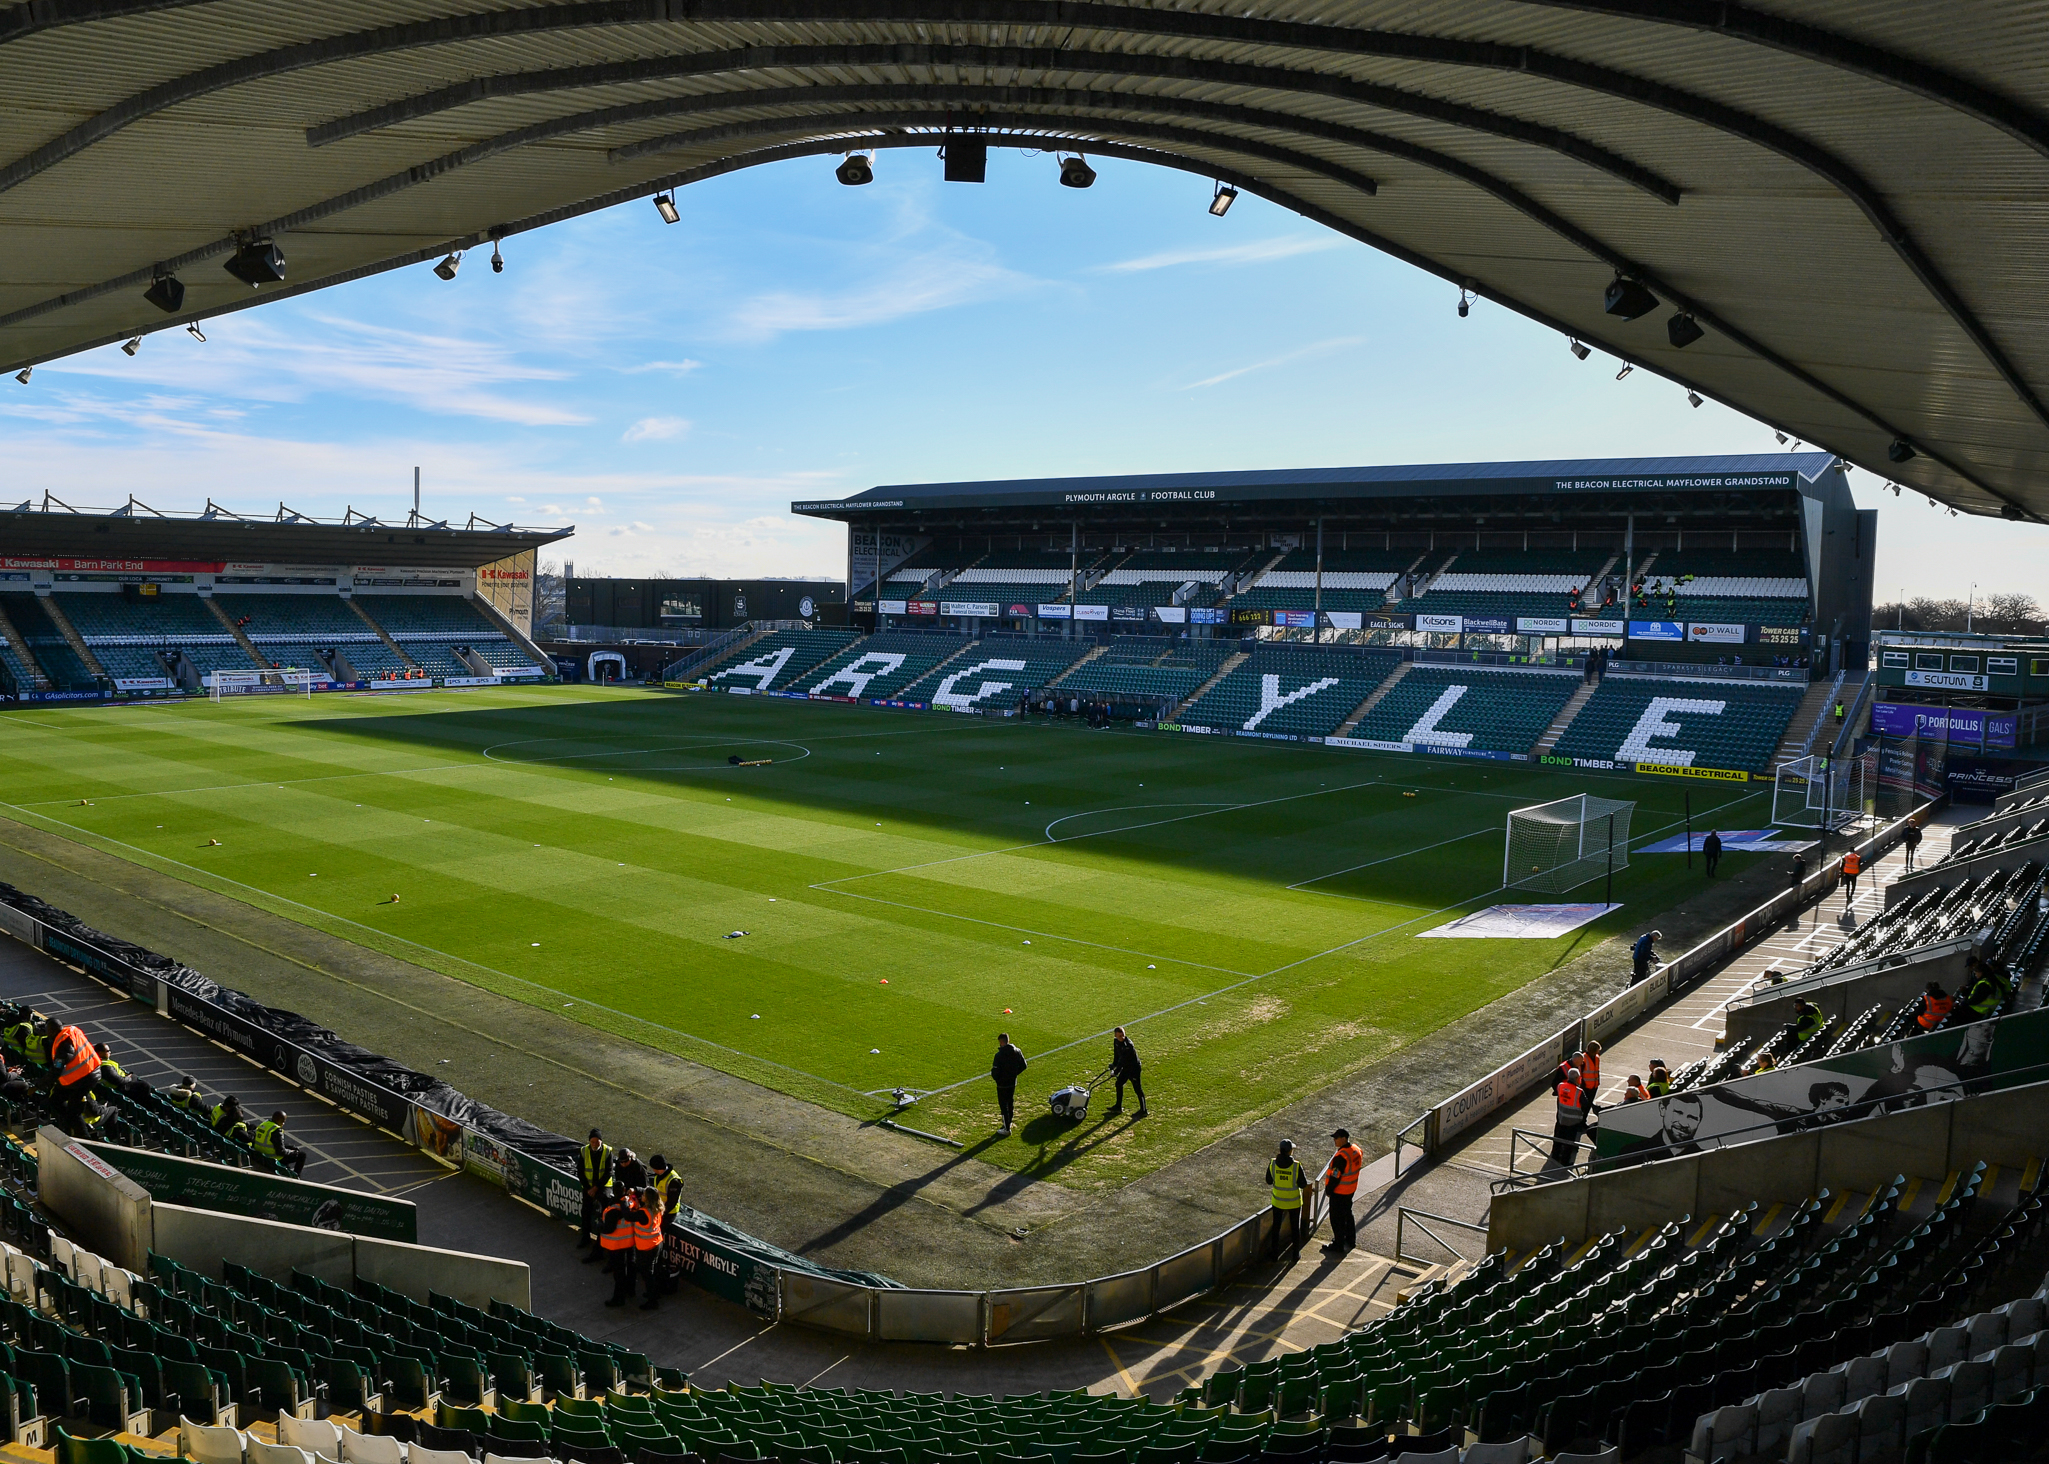 Home Park in the sunshine